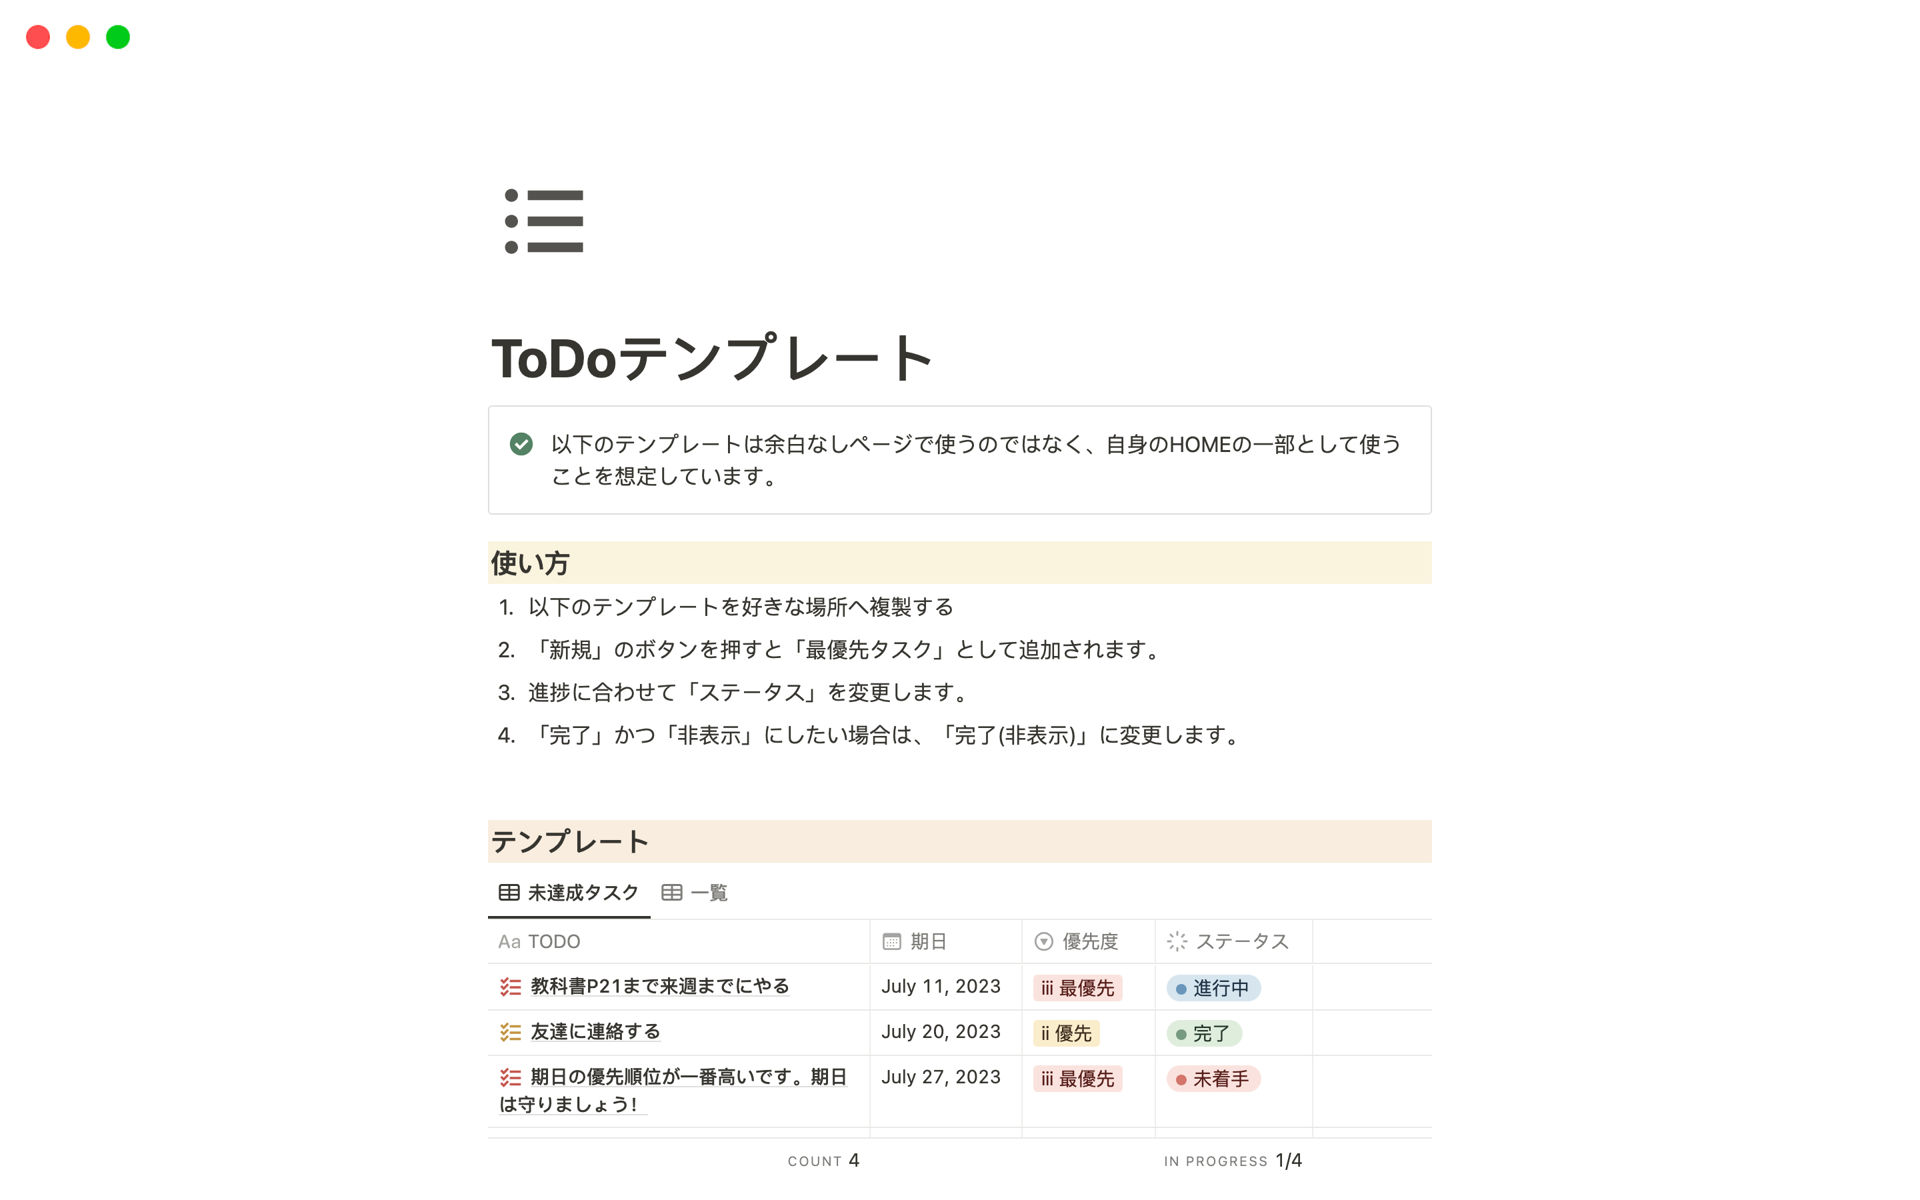 A template preview for 個人用ToDoリスト